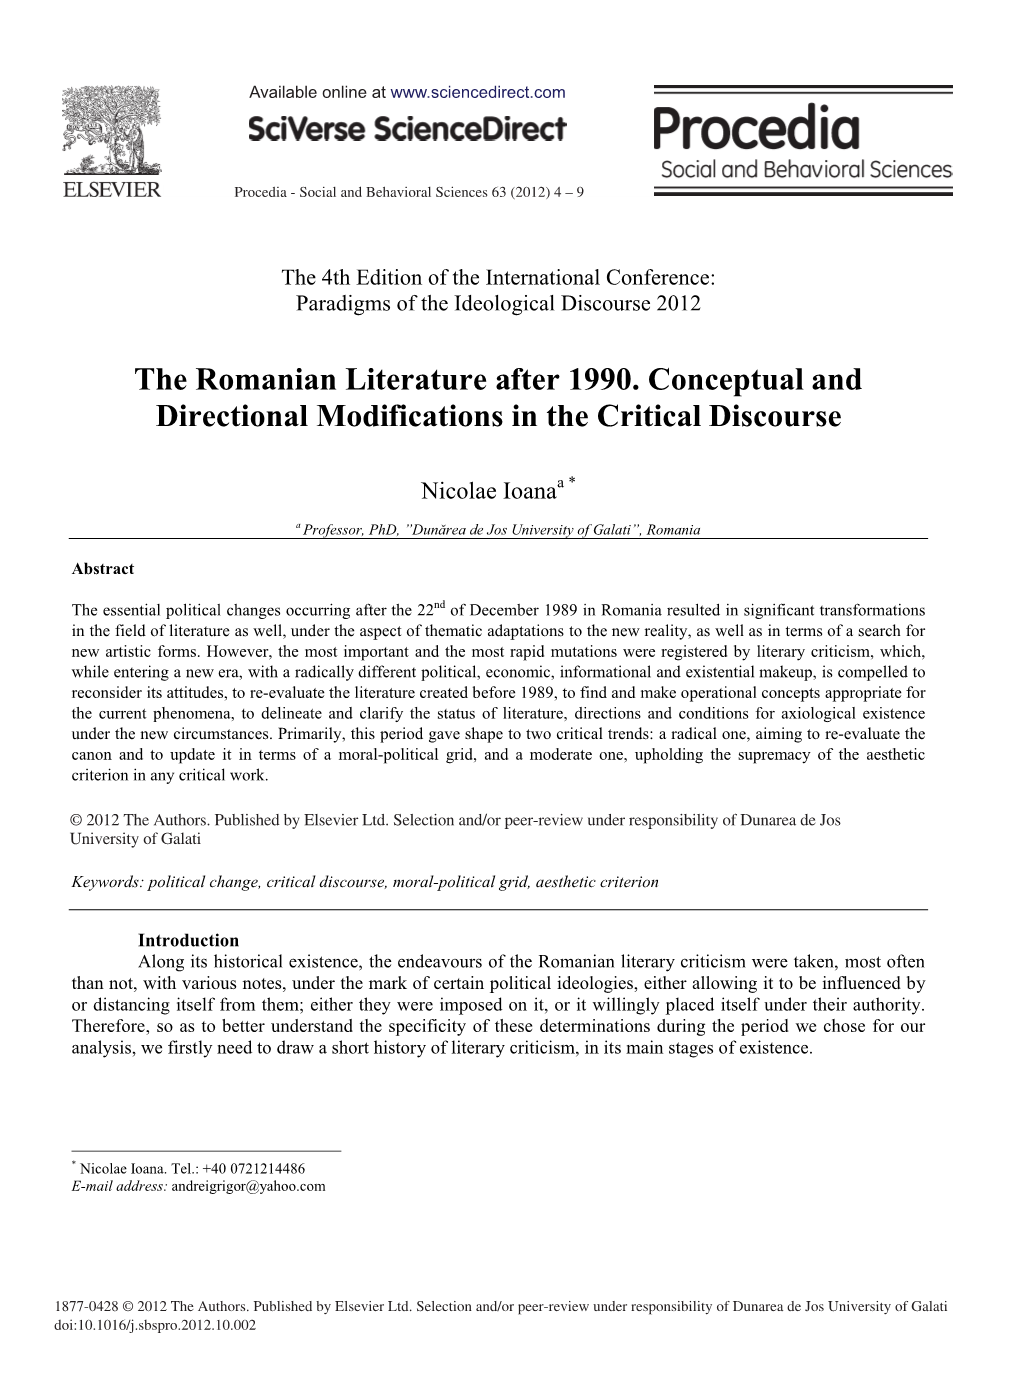 The Romanian Literature After 1990. Conceptual and Directional Modifications in the Critical Discourse